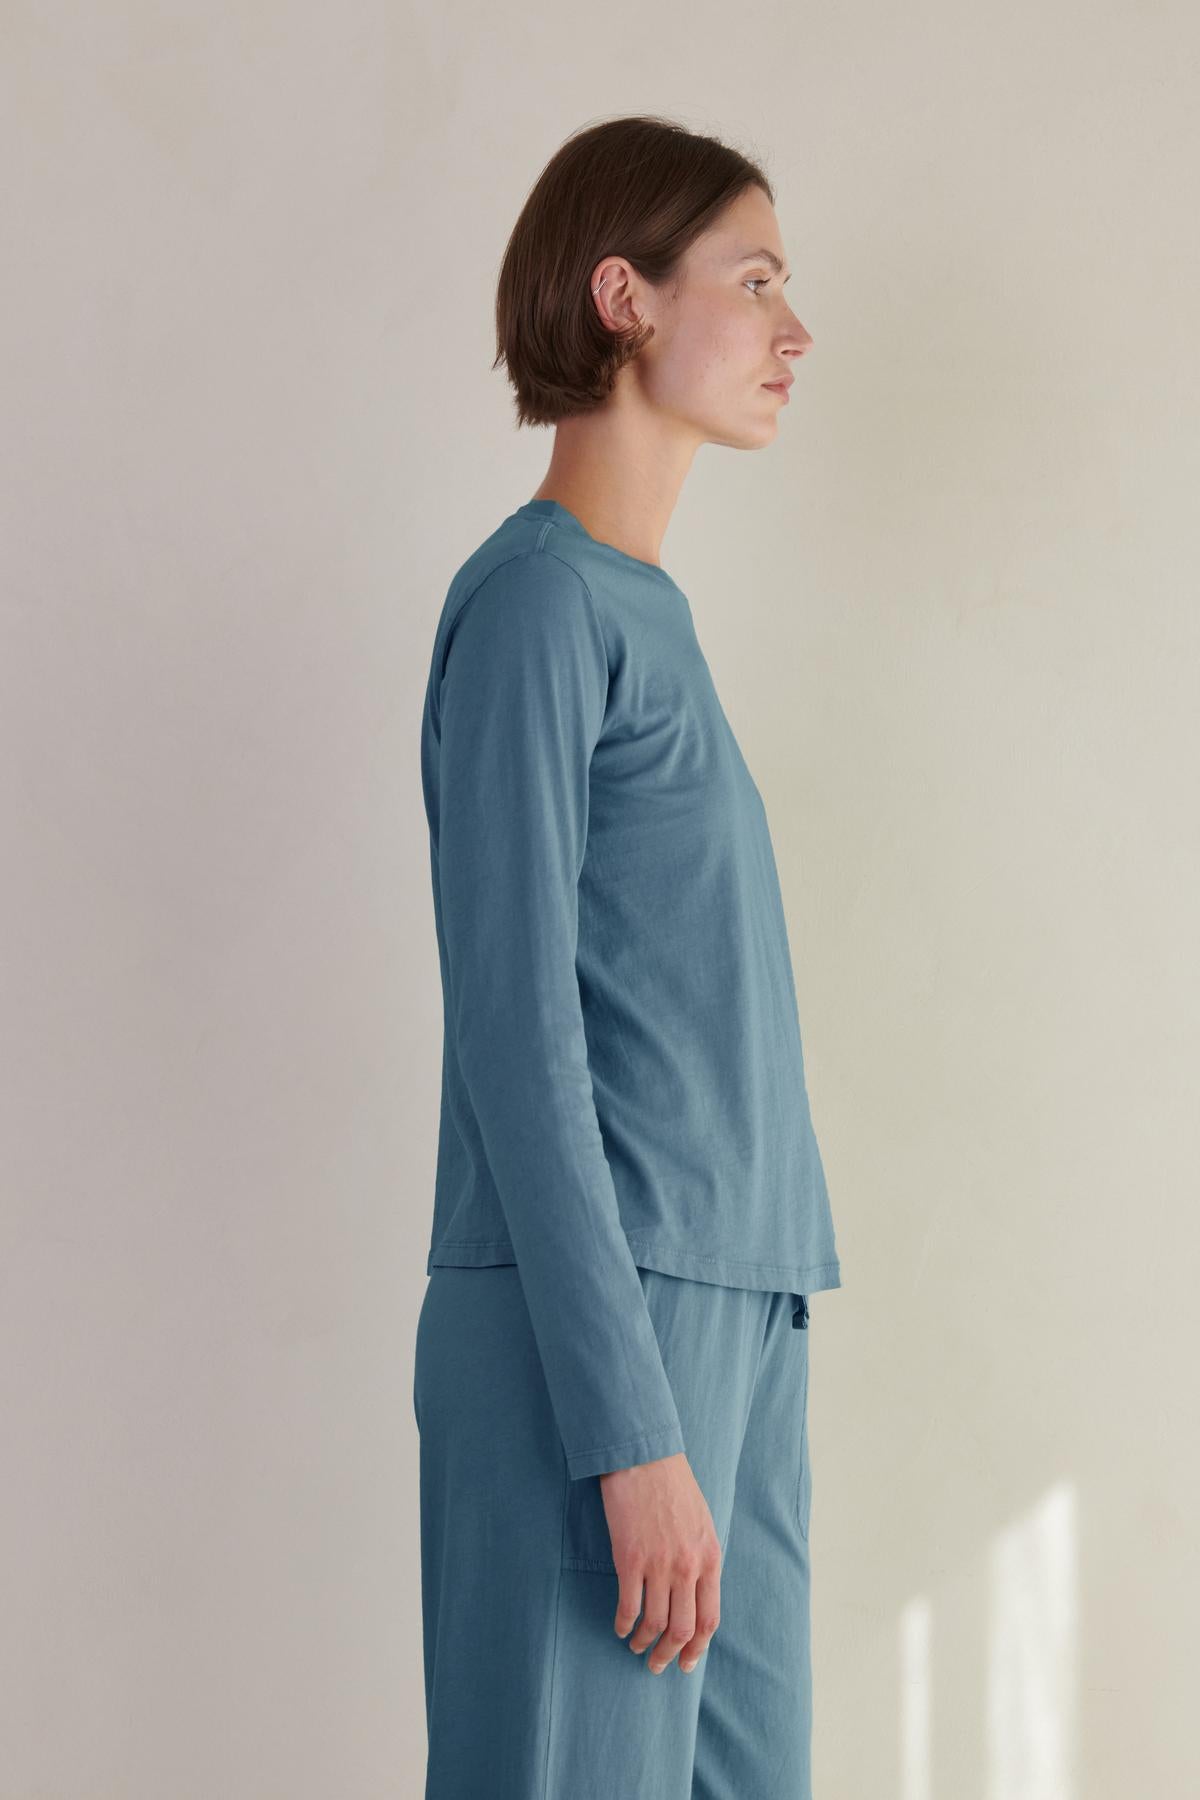 The model is wearing a relaxed fit, long-sleeved organic cotton VICENTE TEE in blue from Velvet by Jenny Graham.-35721180152001